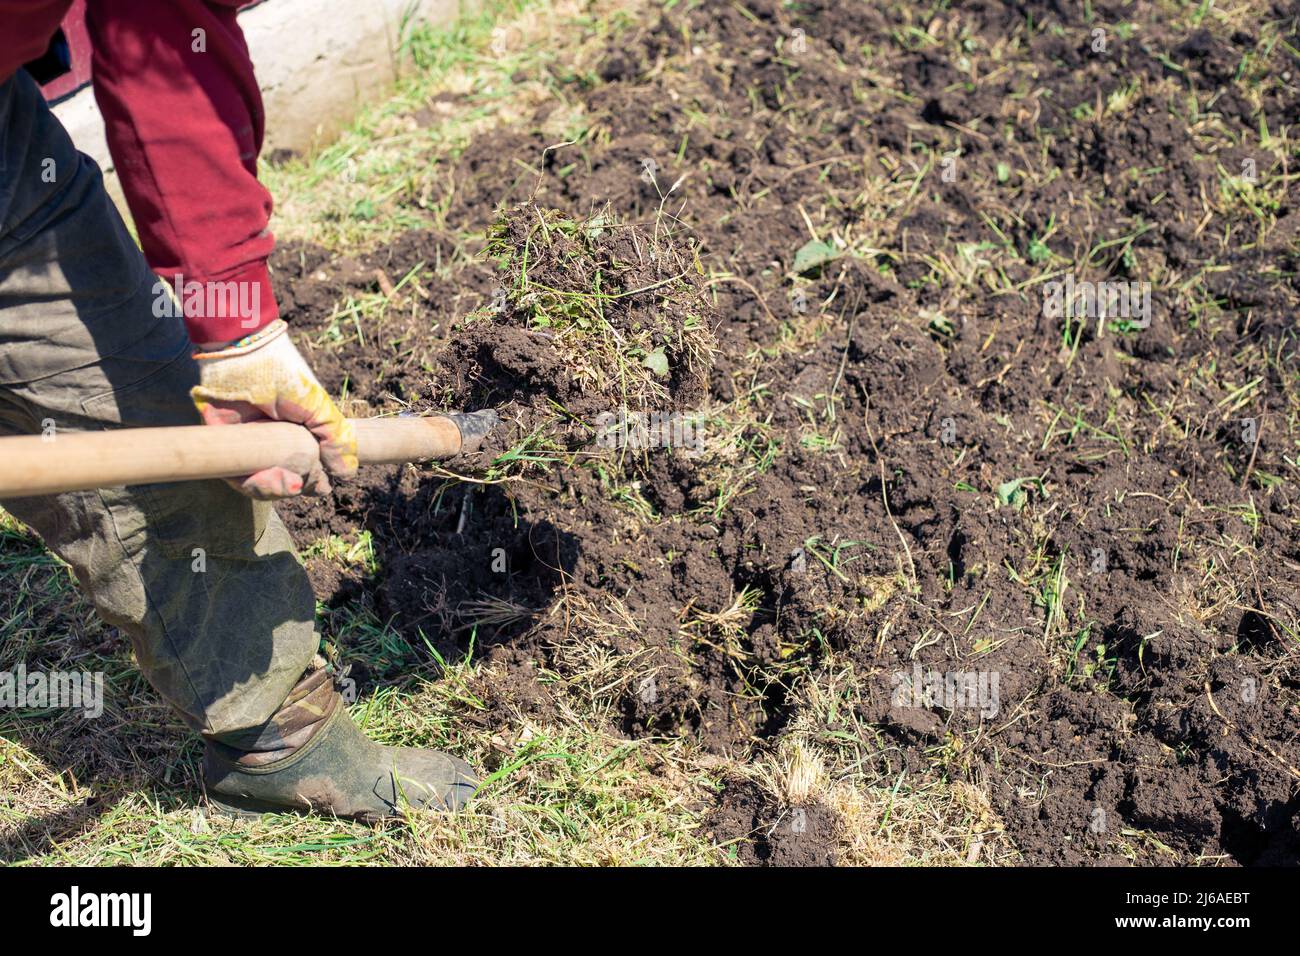 A man is digging a garden with a shovel. Garden work in spring. Planting vegetables and seedlings. Stock Photo